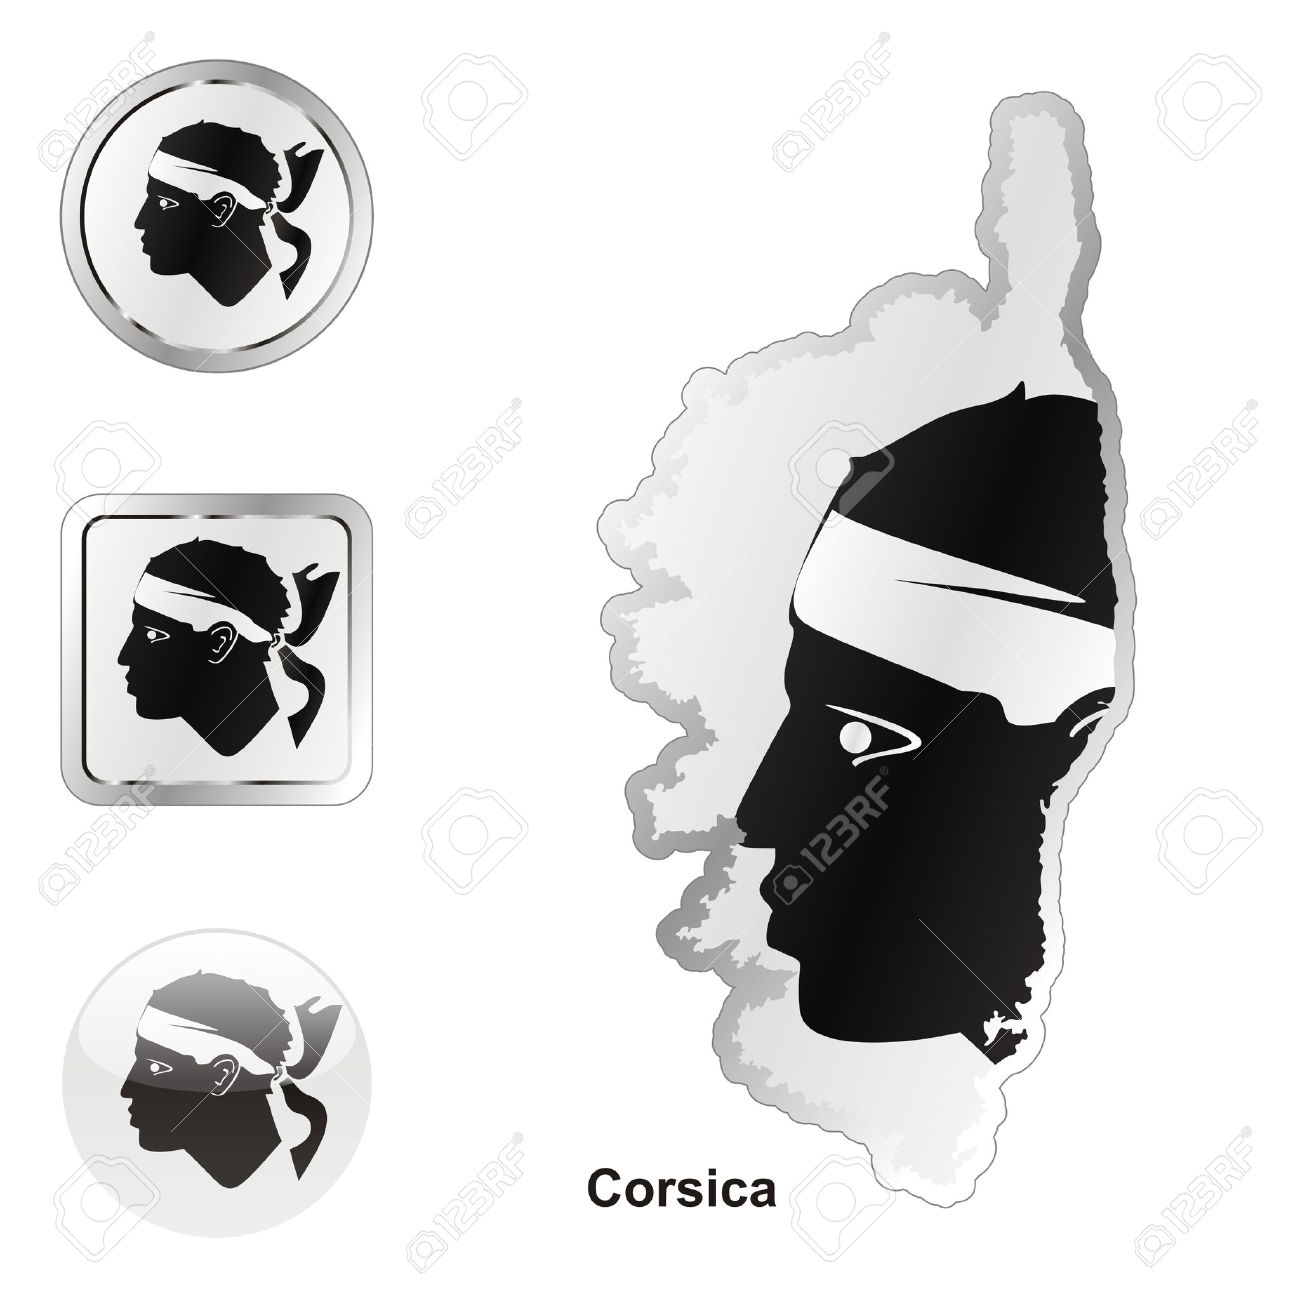 Corsica clipart #11, Download drawings